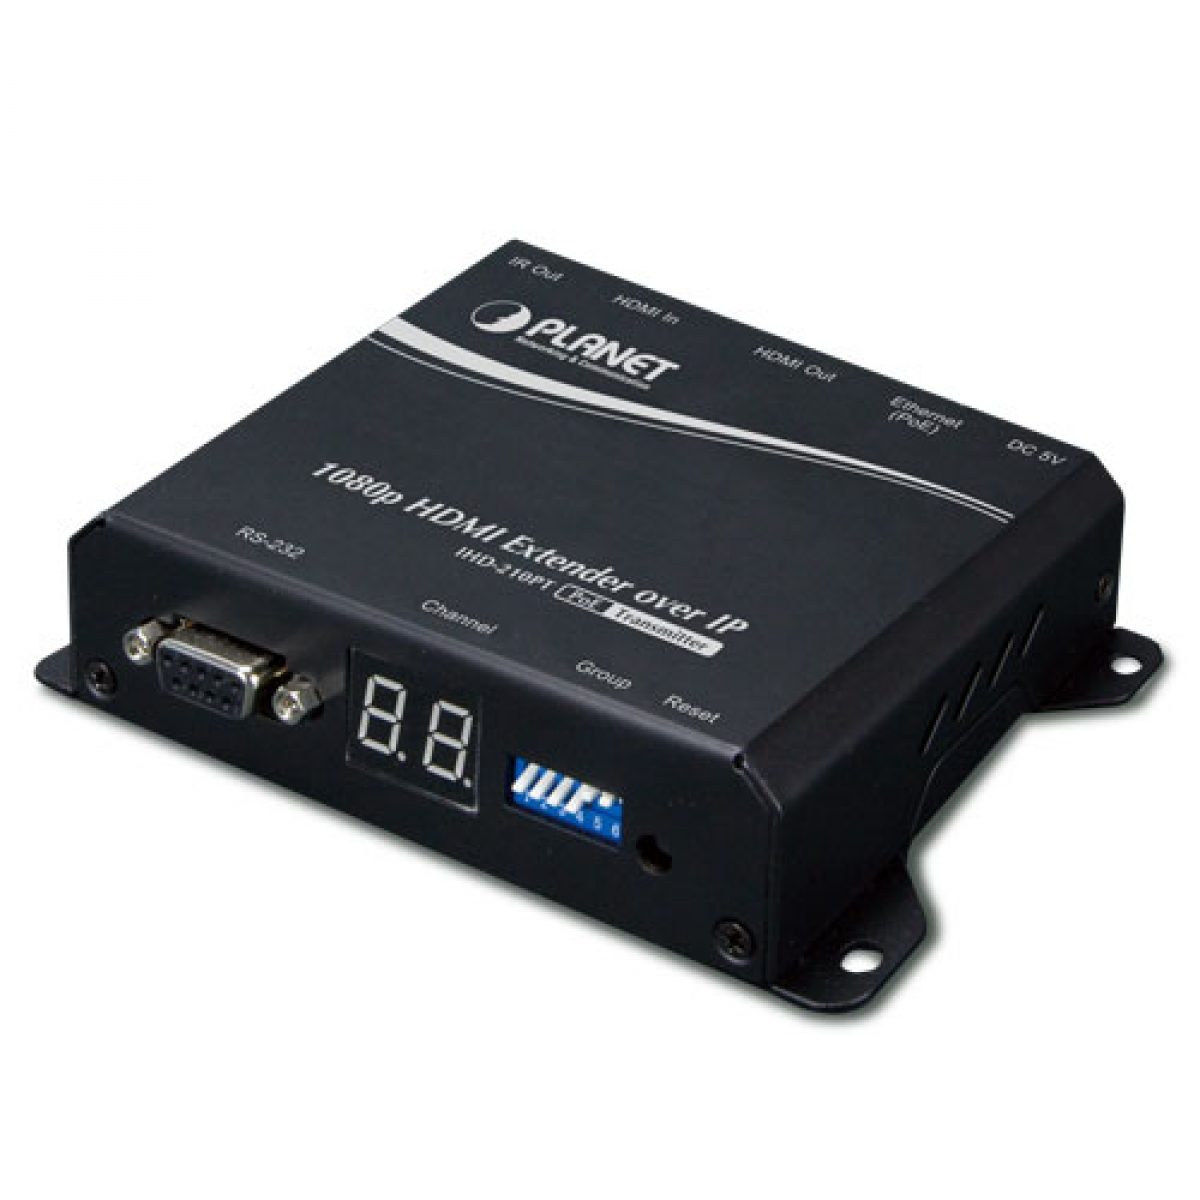 IHD-210PT High Definition HDMI Transmitter over IP with PoE- Digital Signage - Planet USA